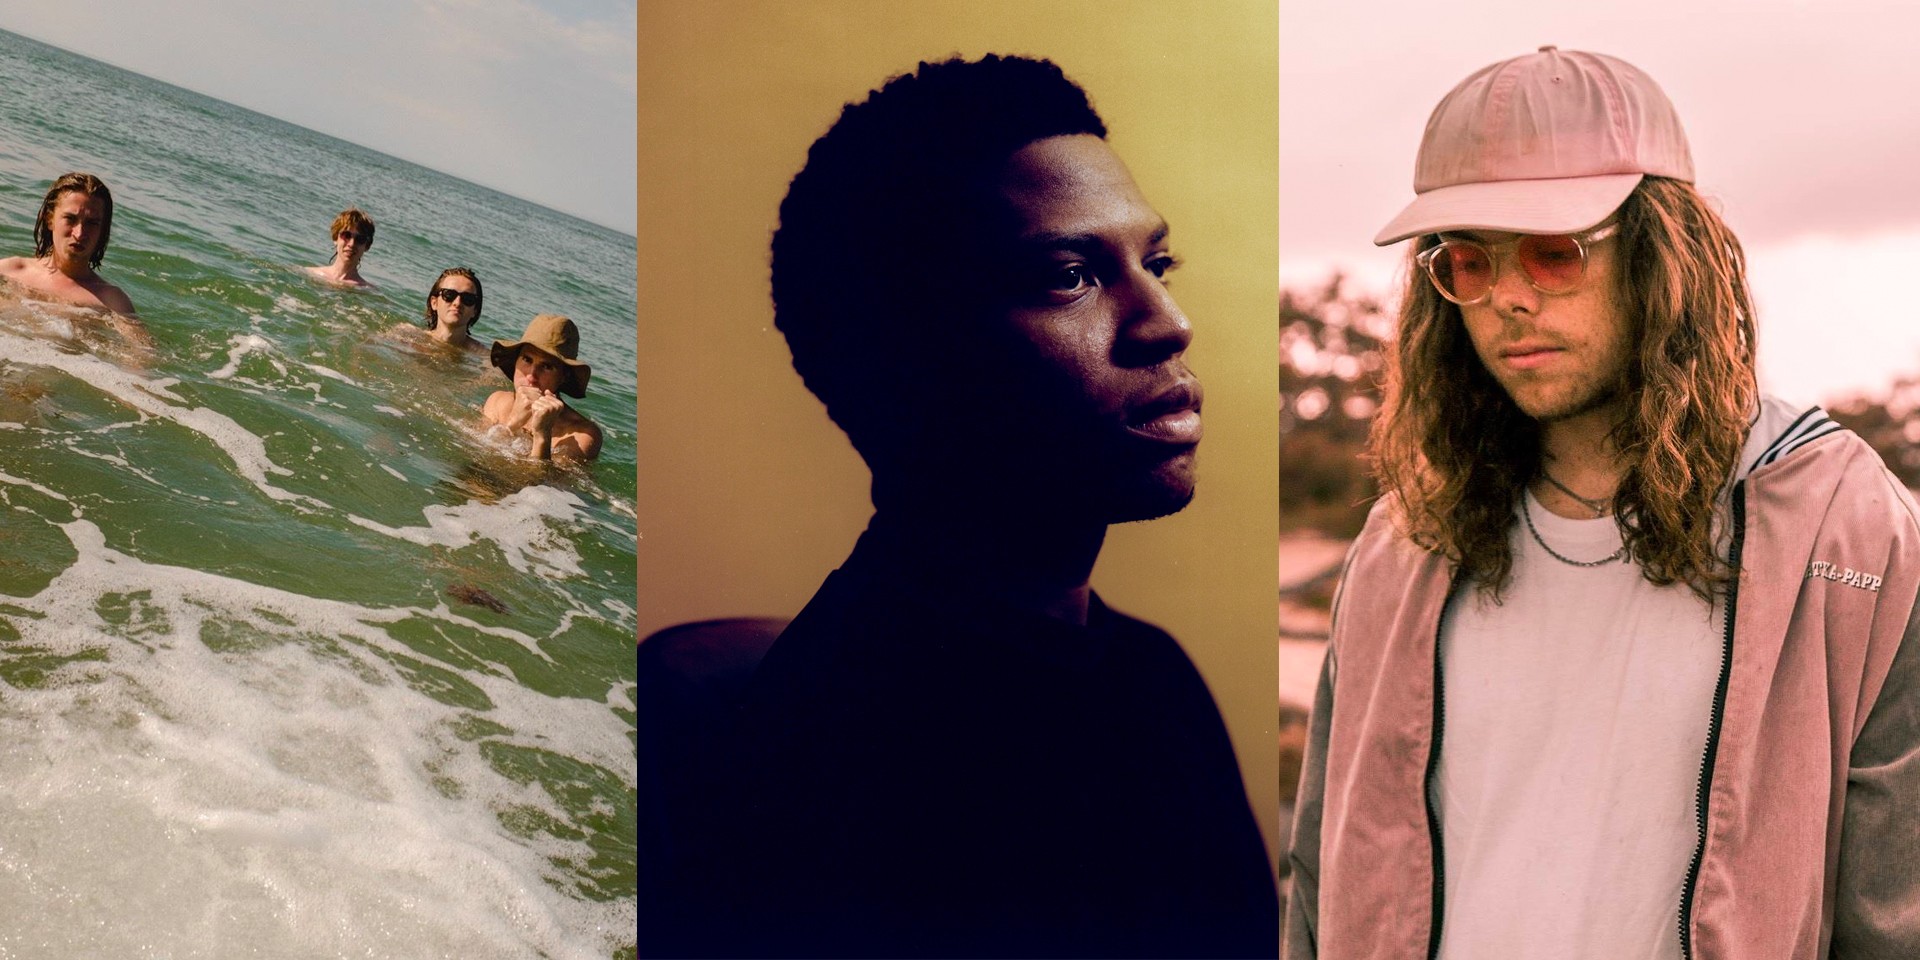 Hodgepodge Superfest in Jakarta adds Gallant, Swim Deep, Vancouver Sleep Clinic etc to lineup